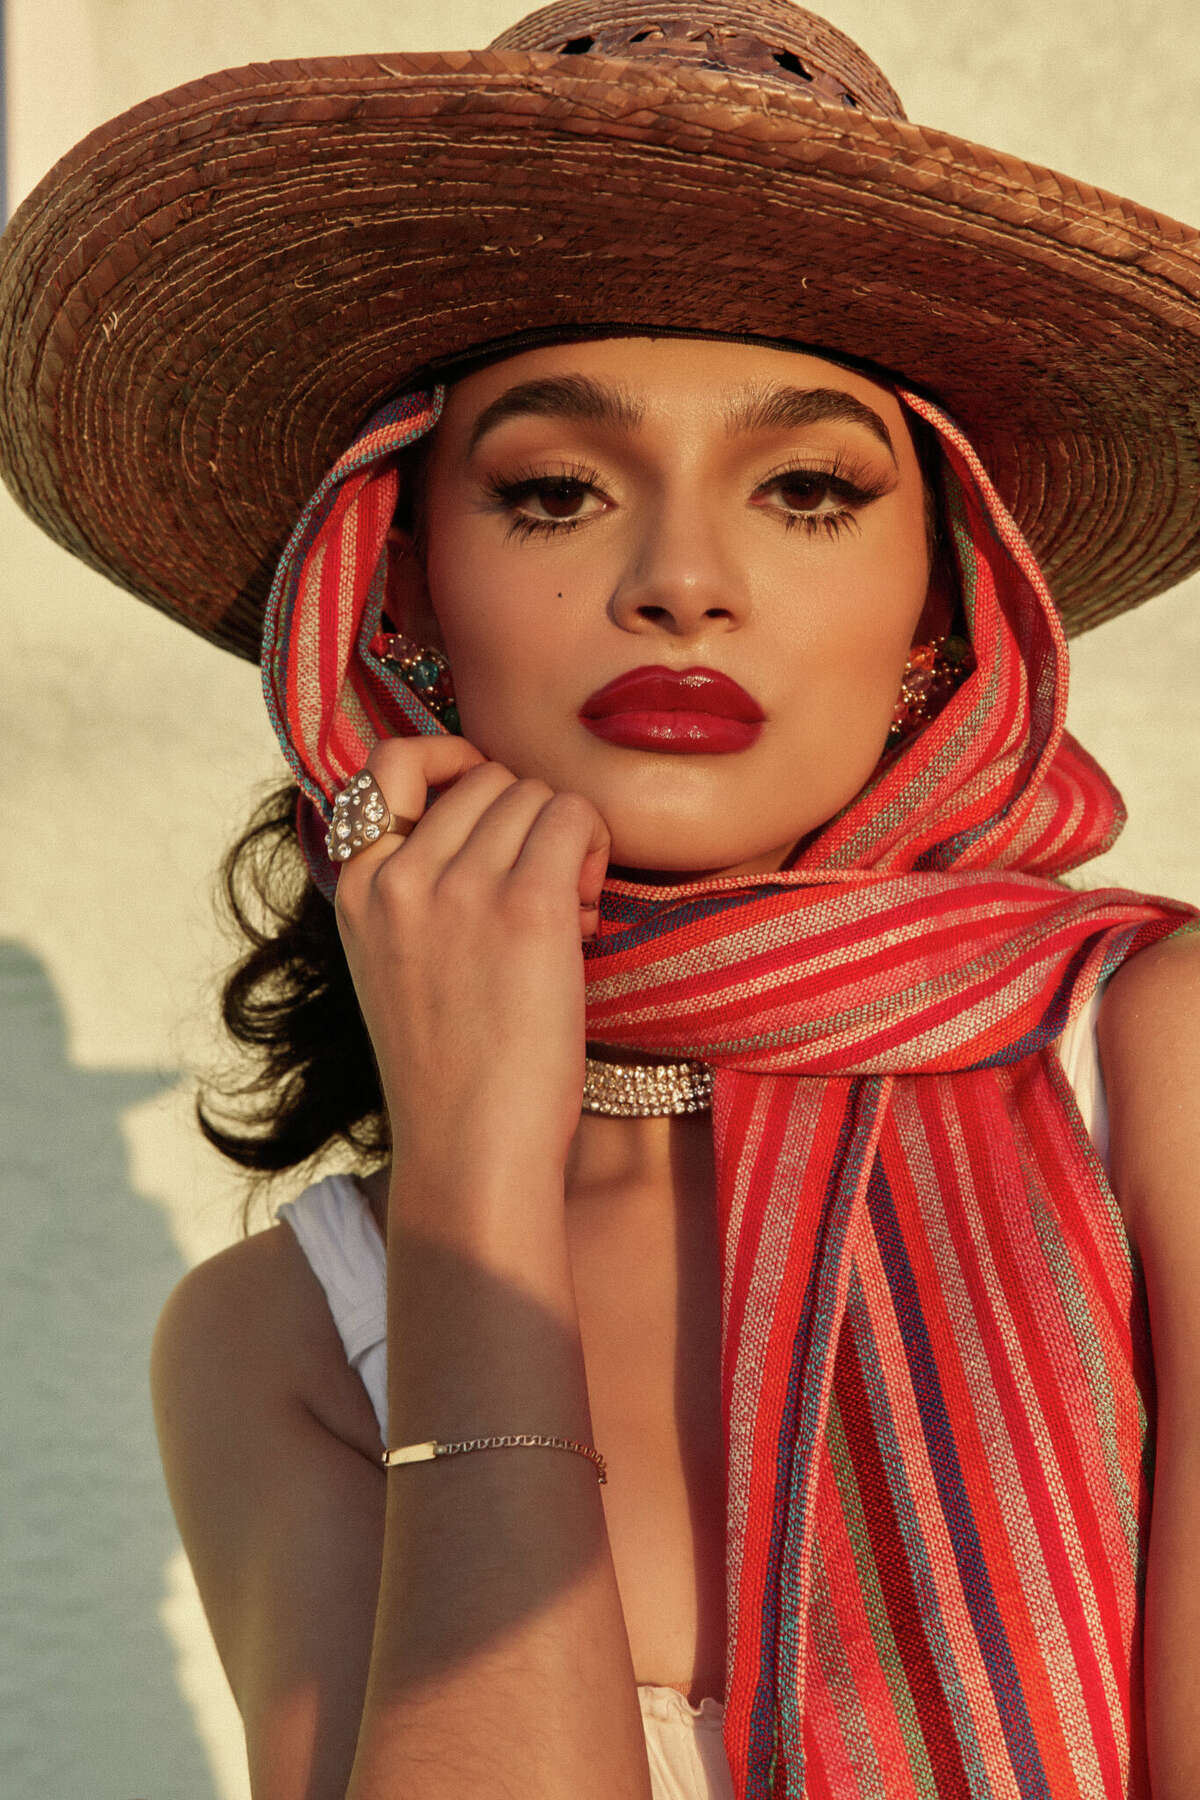 Paulina Chávez in a Maria Felix-inspired photo shoot. The young San Antonio actress discovered she has a family connection to the legendary actress from the Golden Age of Mexican cinema.